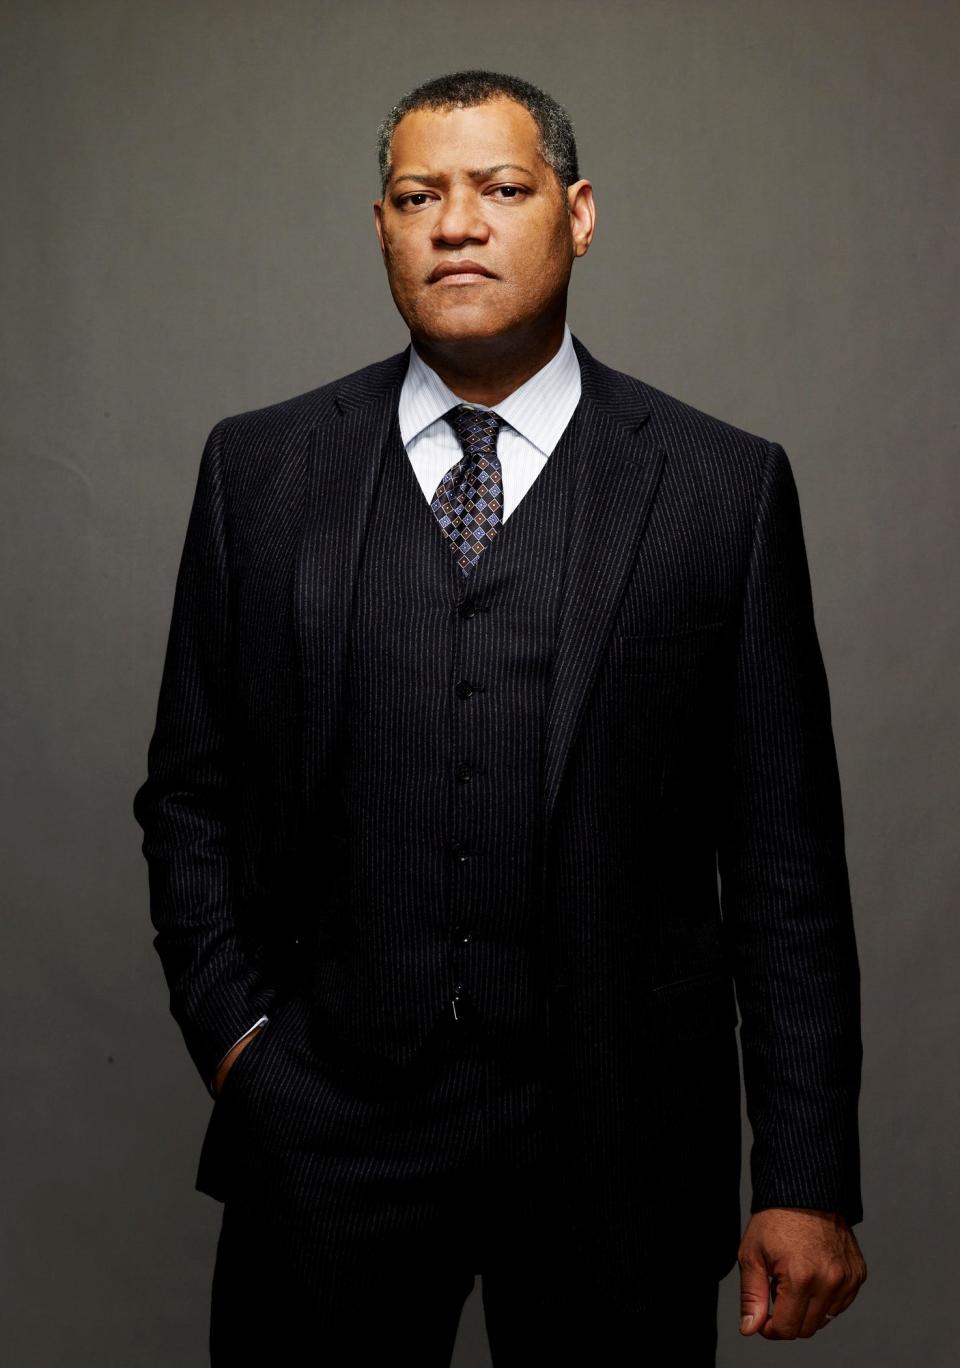 Oscar-nominated actor Laurence Fishburne will attend the 2023 Freep Film Festival as a guest on Elvis Mitchell's nationally syndicated radio show "The Treatment" as well as appearing on two post-film discussions - Mitchell's debut documentary "Is That Black Enough For You?!?" and "The Cave of Adullam," which Fishburne was an executive producer on the Detroit-based film.